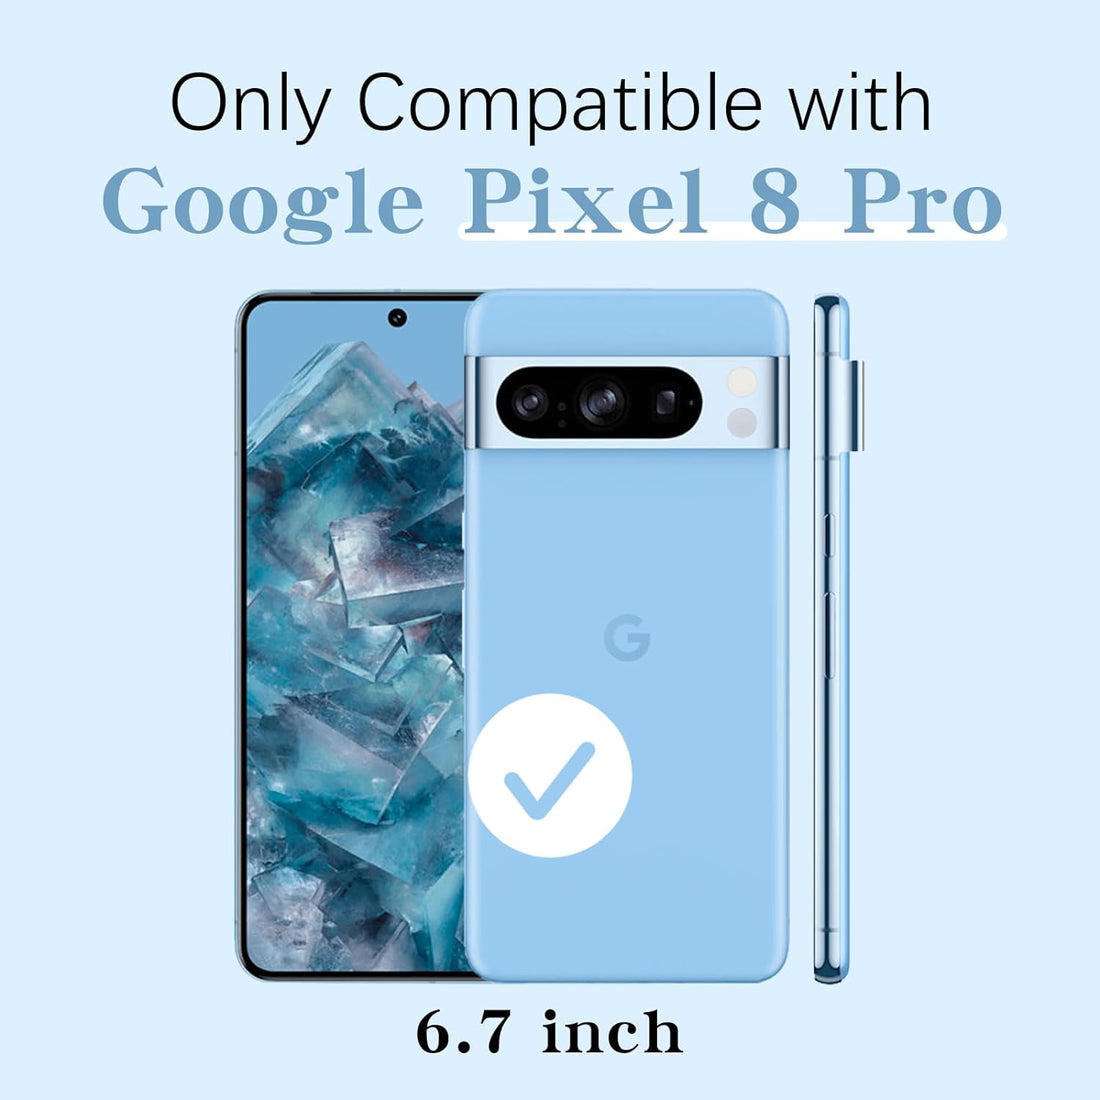 TSAYGFK for Oneplus 8 Pro Case for Women Glitter Crystal Soft Stylish Clear TPU Luxury Cute Protective Cover with Kickstand Strap for Oneplus 8 Pro (Glitter Rose)